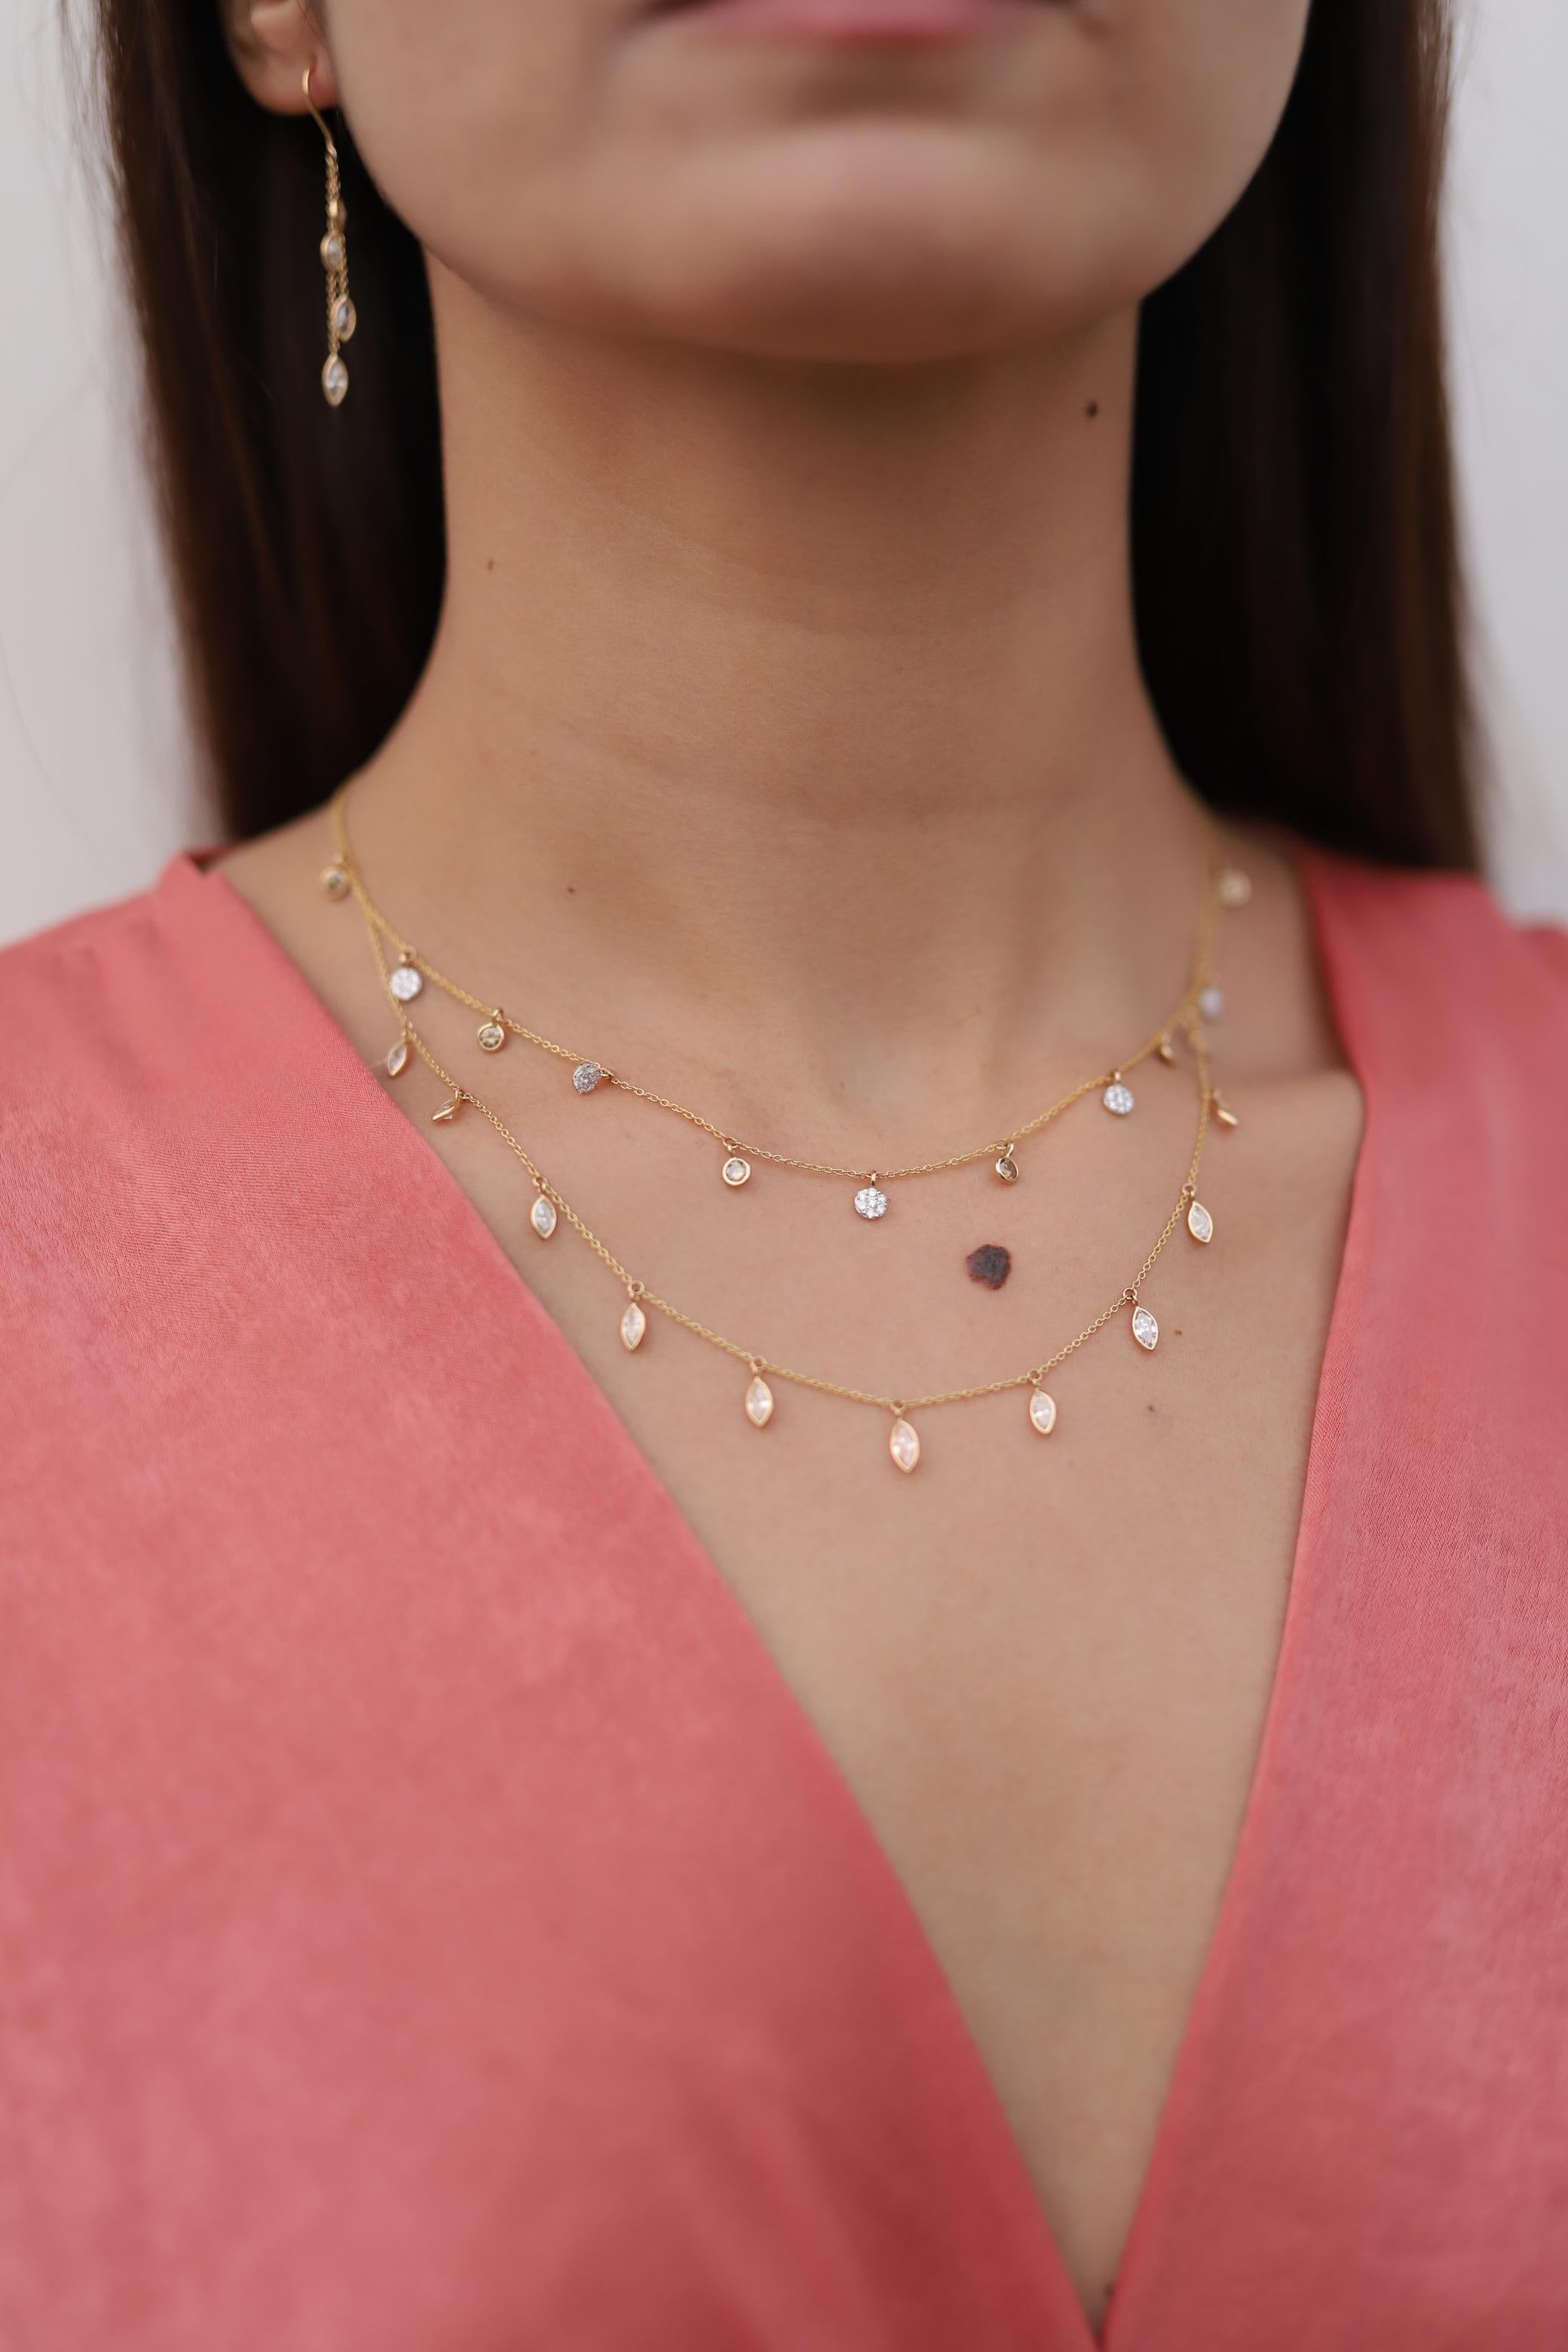 Natural Natural Diamond Chain Necklace in 18K Gold studded with round cut diamond. This stunning piece of jewelry instantly elevates a casual look or dressy outfit. 
April birthstone diamond brings love, fame, success and prosperity.
Designed with